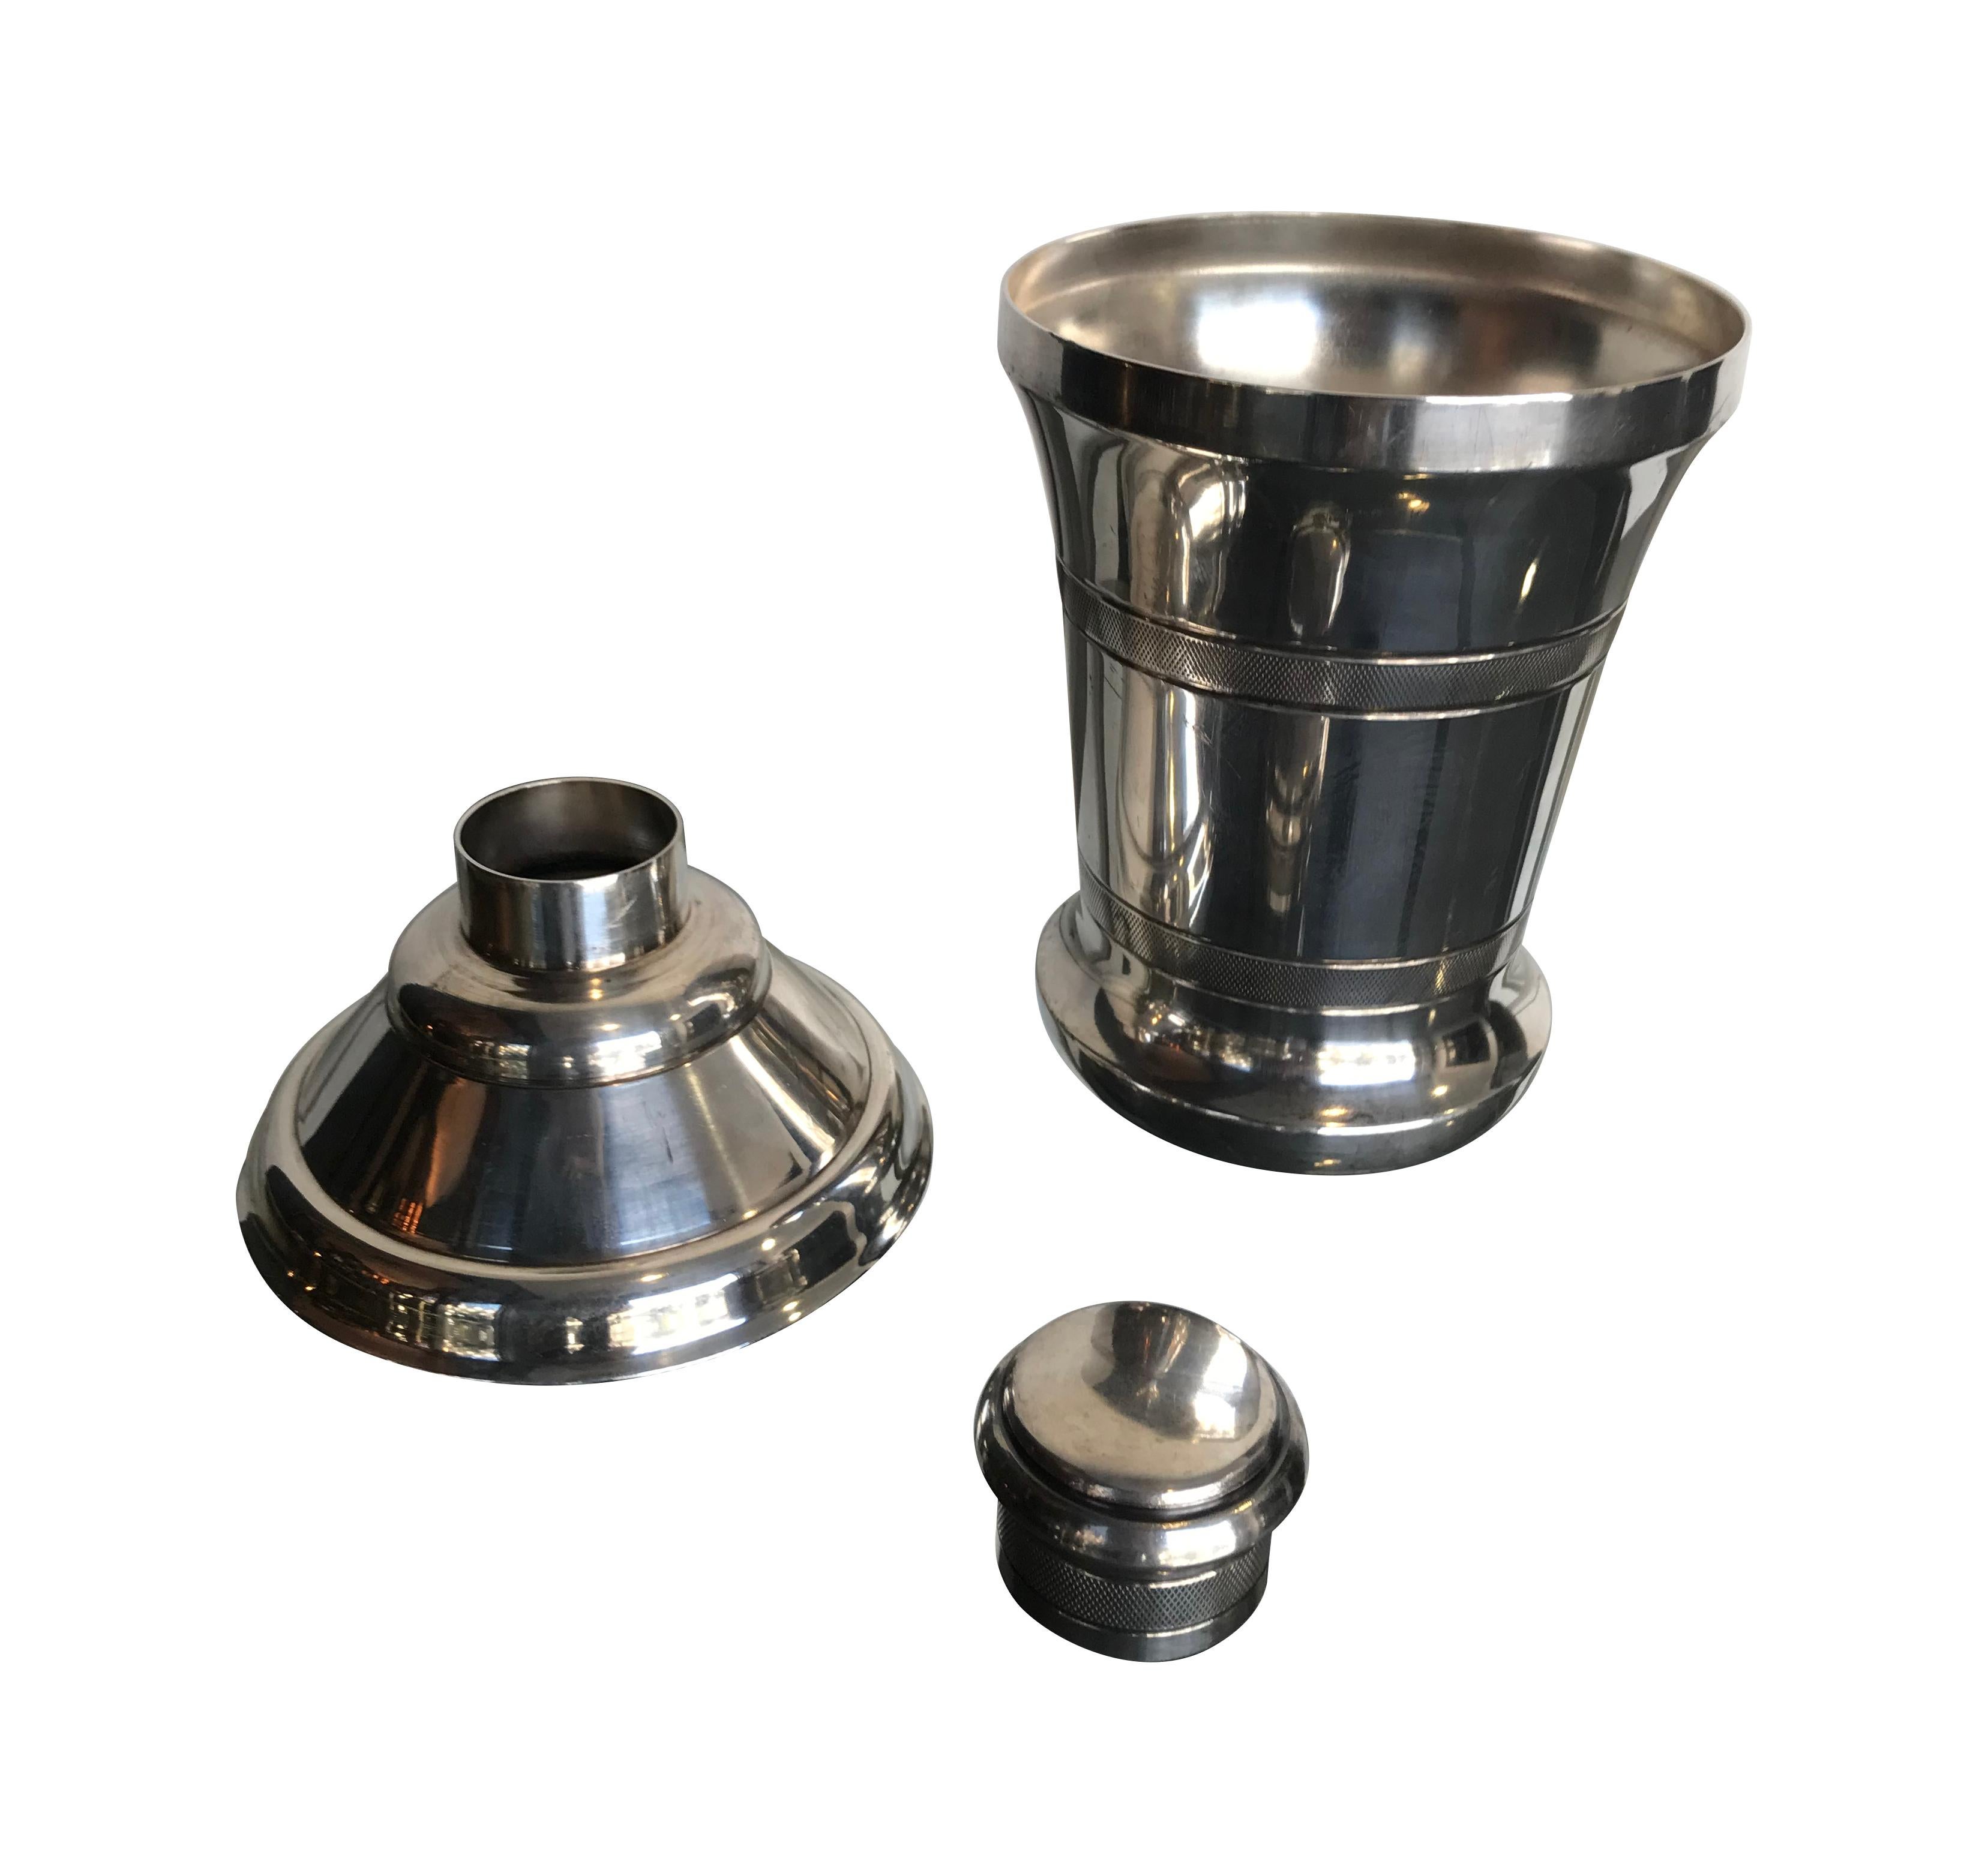 A 1930s matching silver plated champagne cooler and cocktail shaker, each with curved base and etched details. Cocktail shaker measures 21 cm high / 8 1/4 